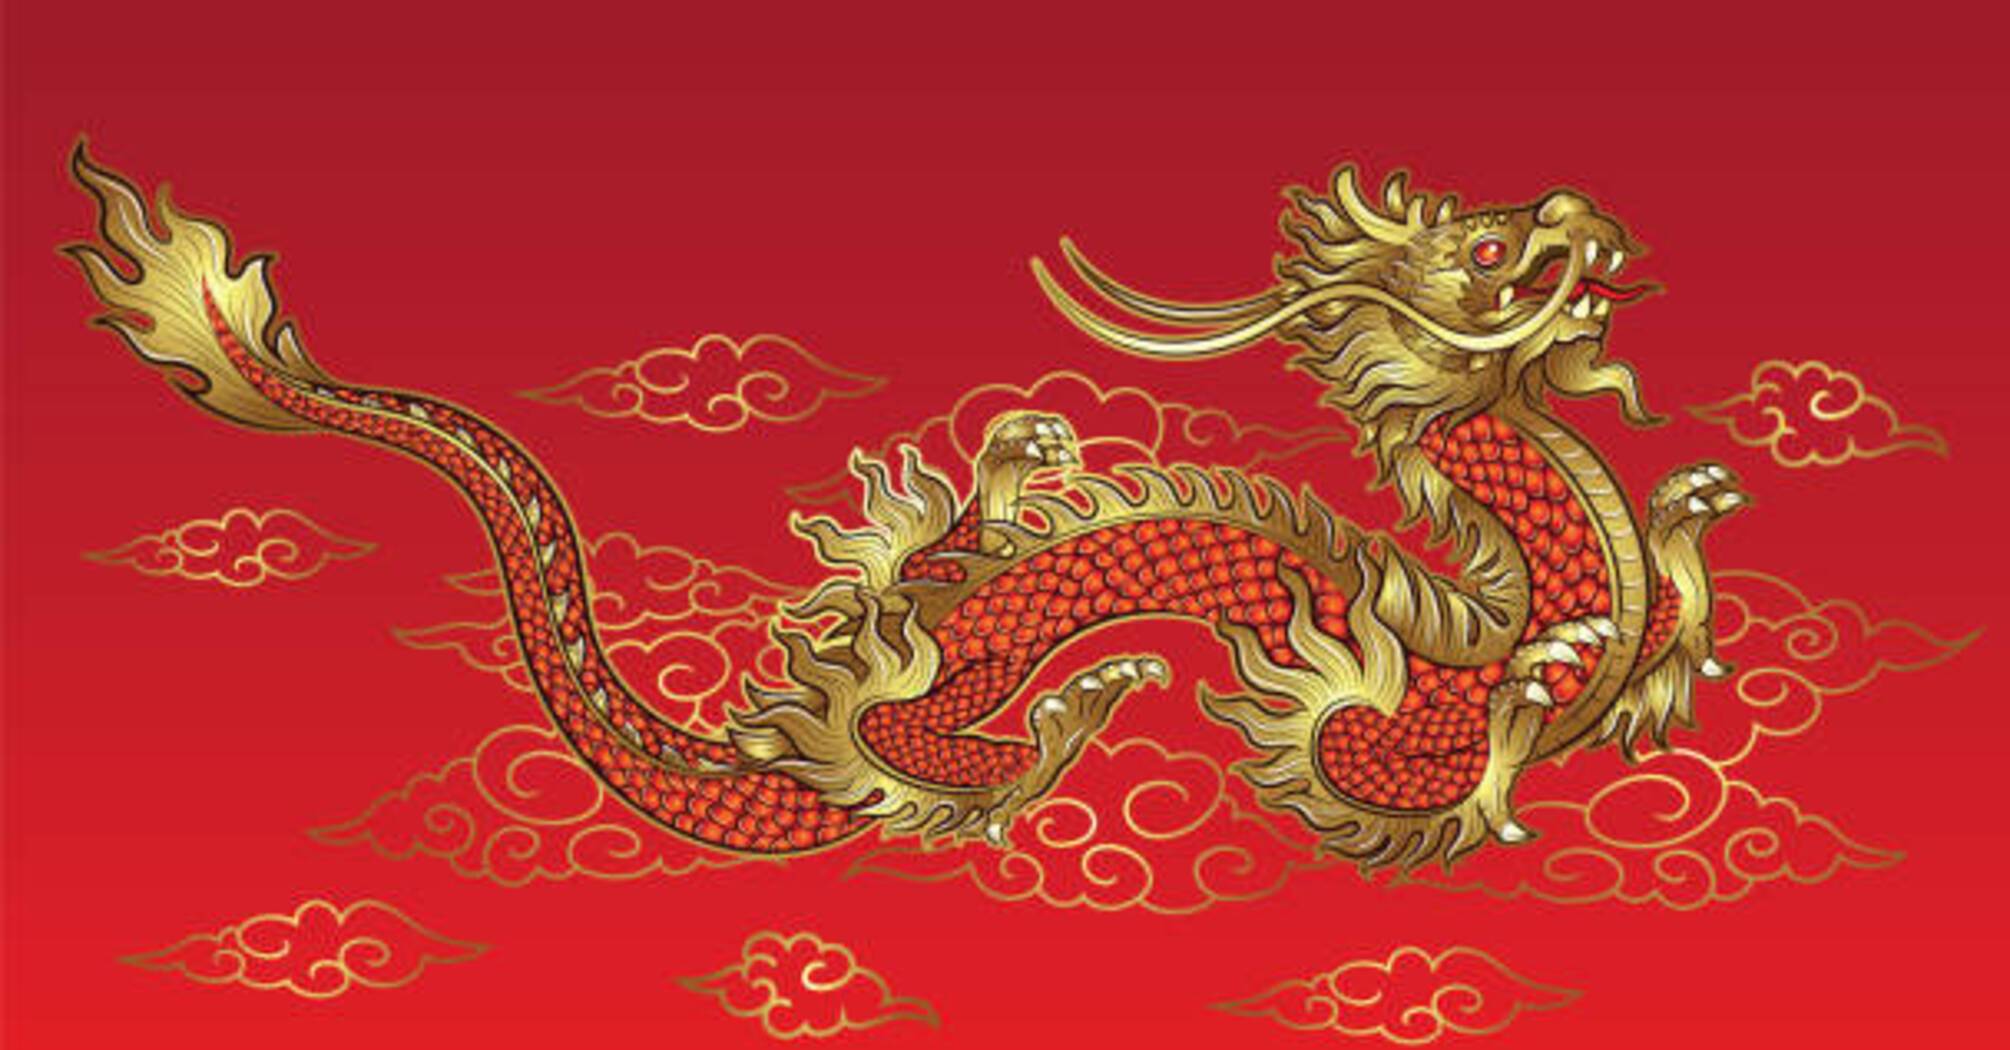 Expect a day filled with harmony and peace: Chinese Horoscope for February 2